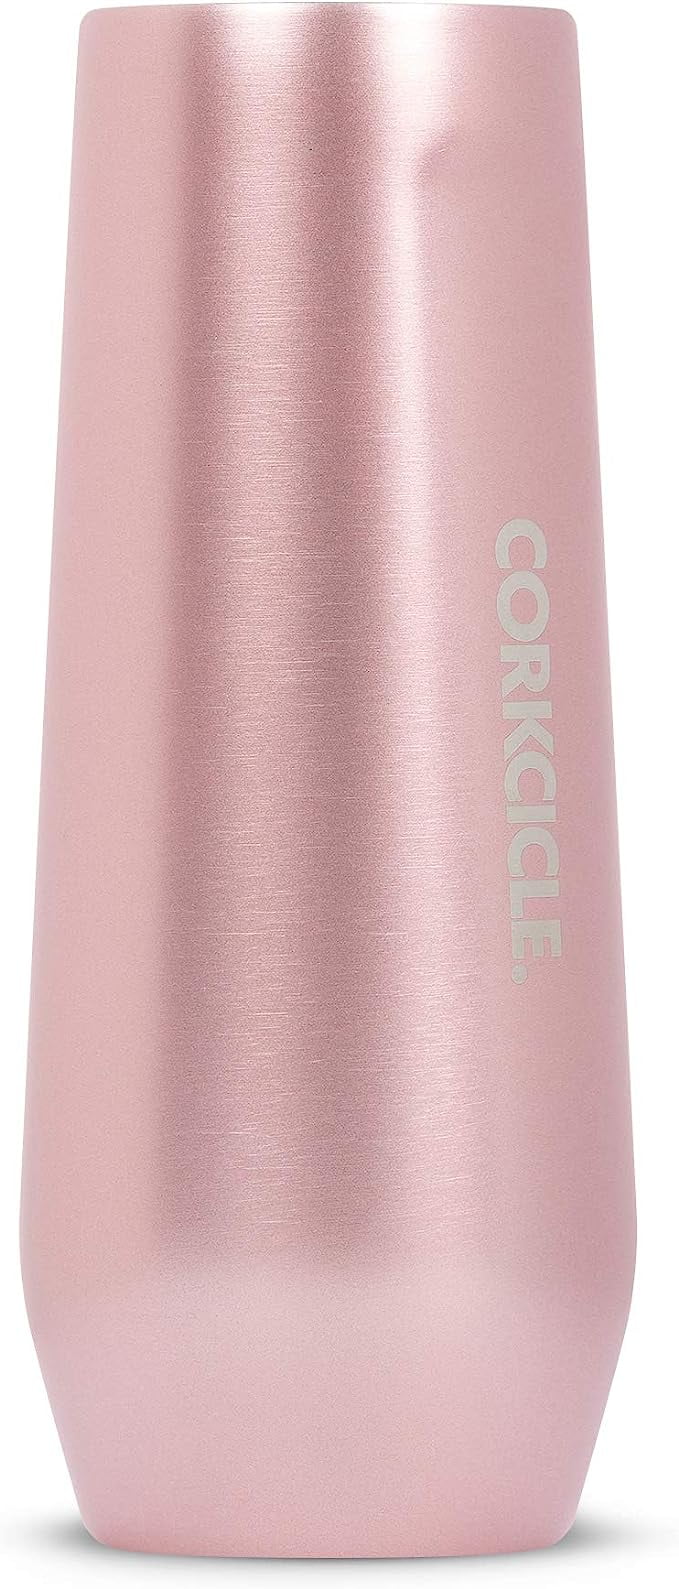 PREOWNED CORKCICLE CHAMPAGNE WINE FLUTE 7 OZ WHITE PINK CUP